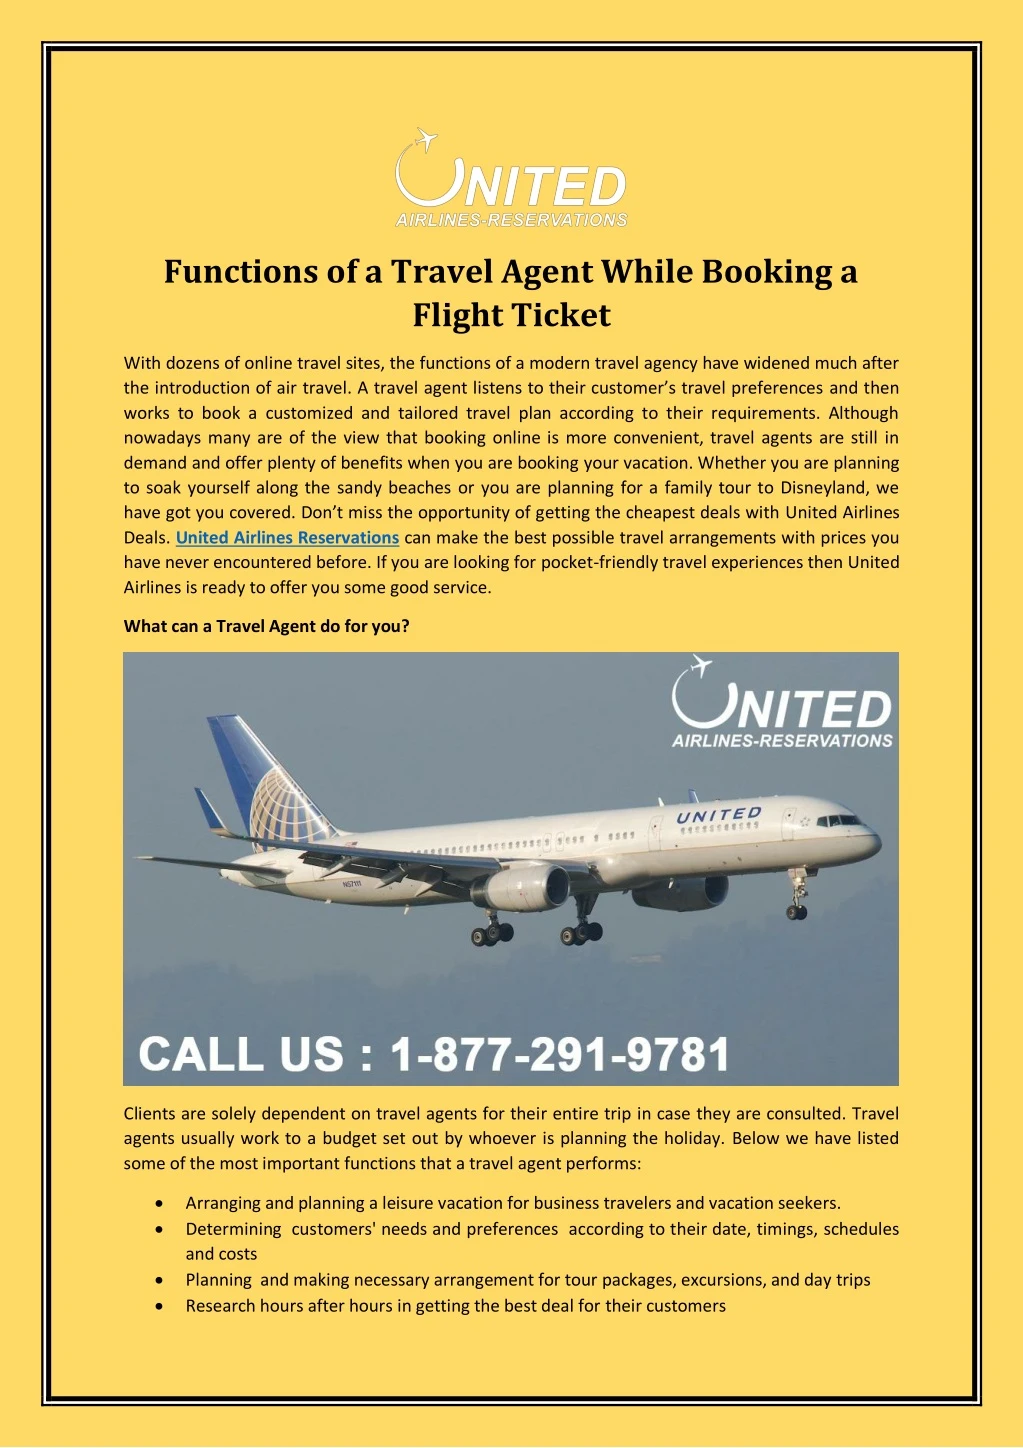 functions of a travel agent while booking